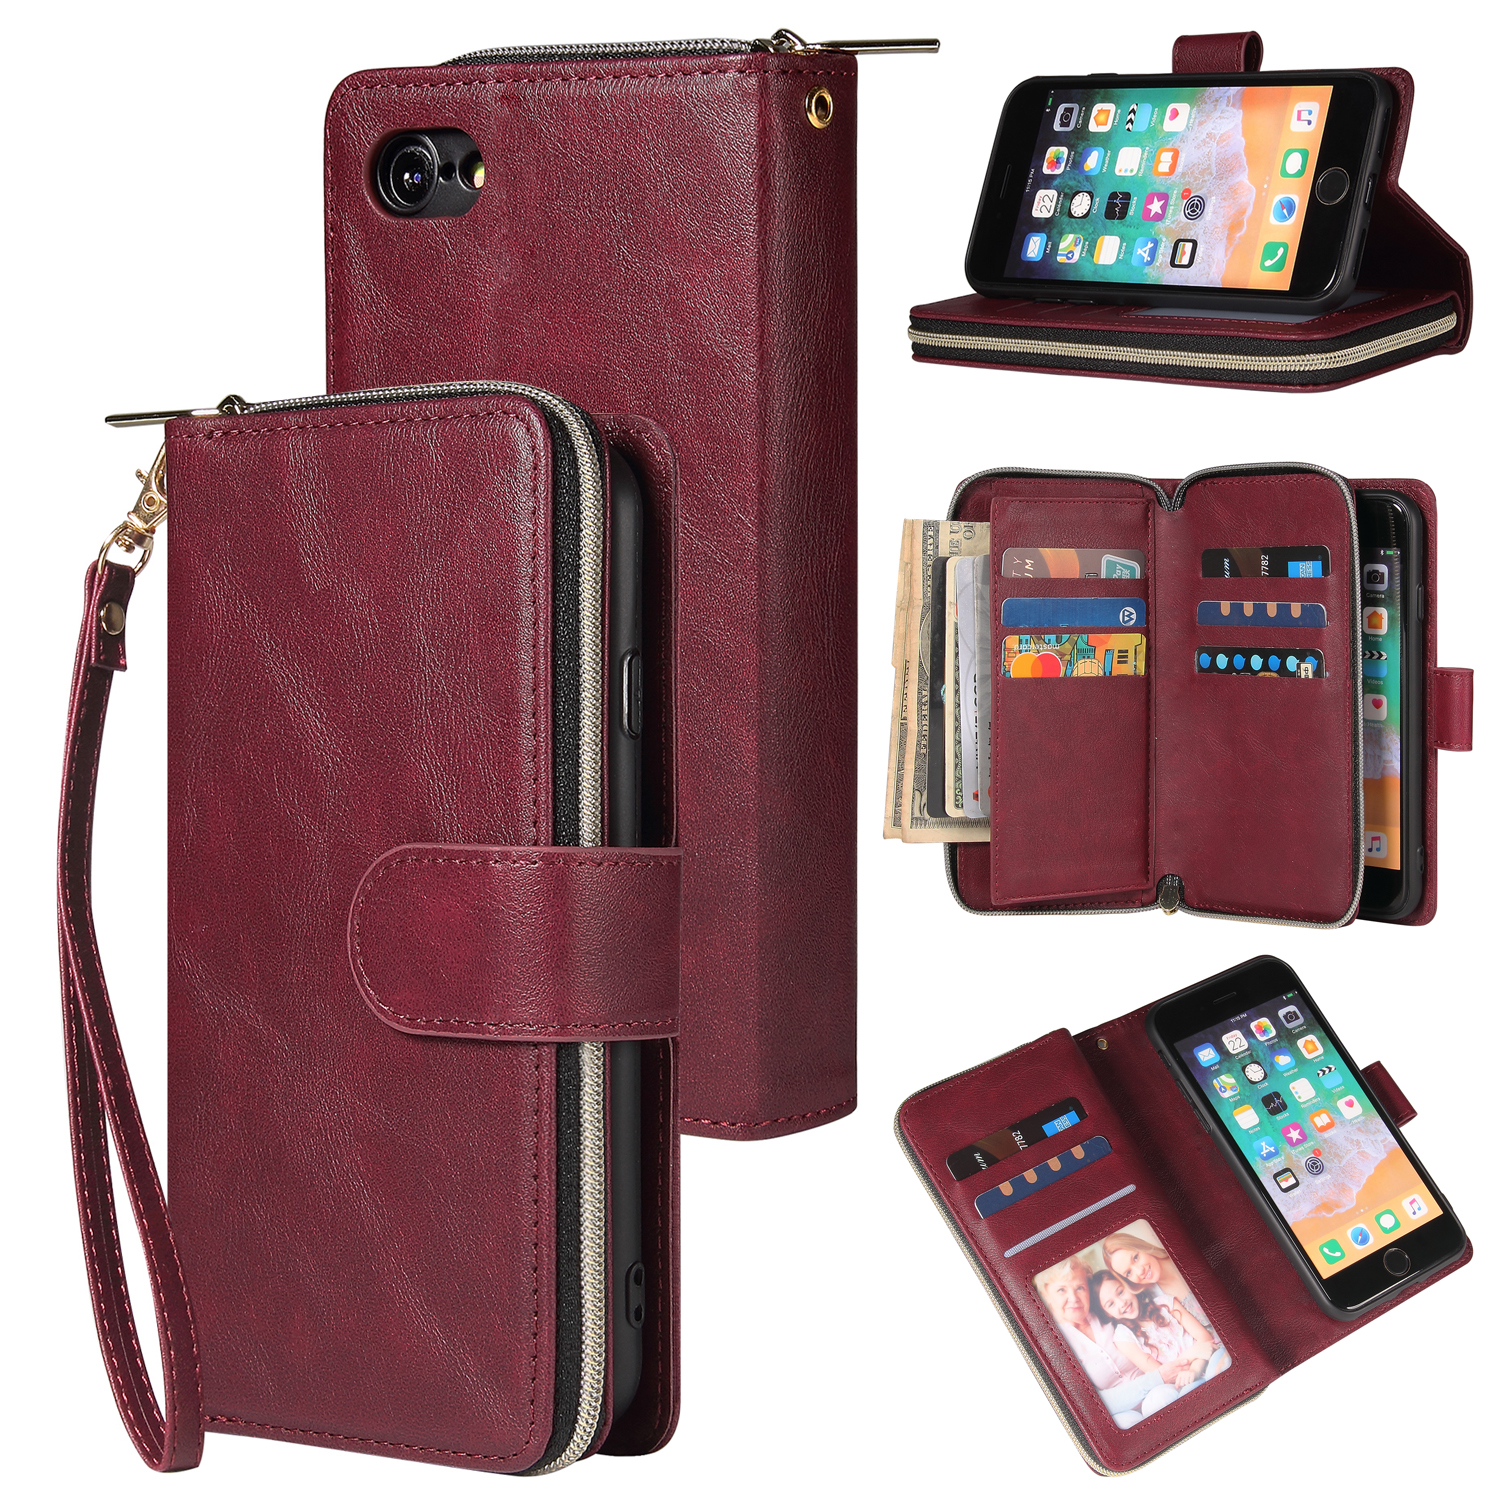 For Iphone 6/6s/6 Plus/6s Plus/7 Plus/8 Plus Pu Leather  Mobile Phone Cover Zipper Card Bag + Wrist Strap Red wine